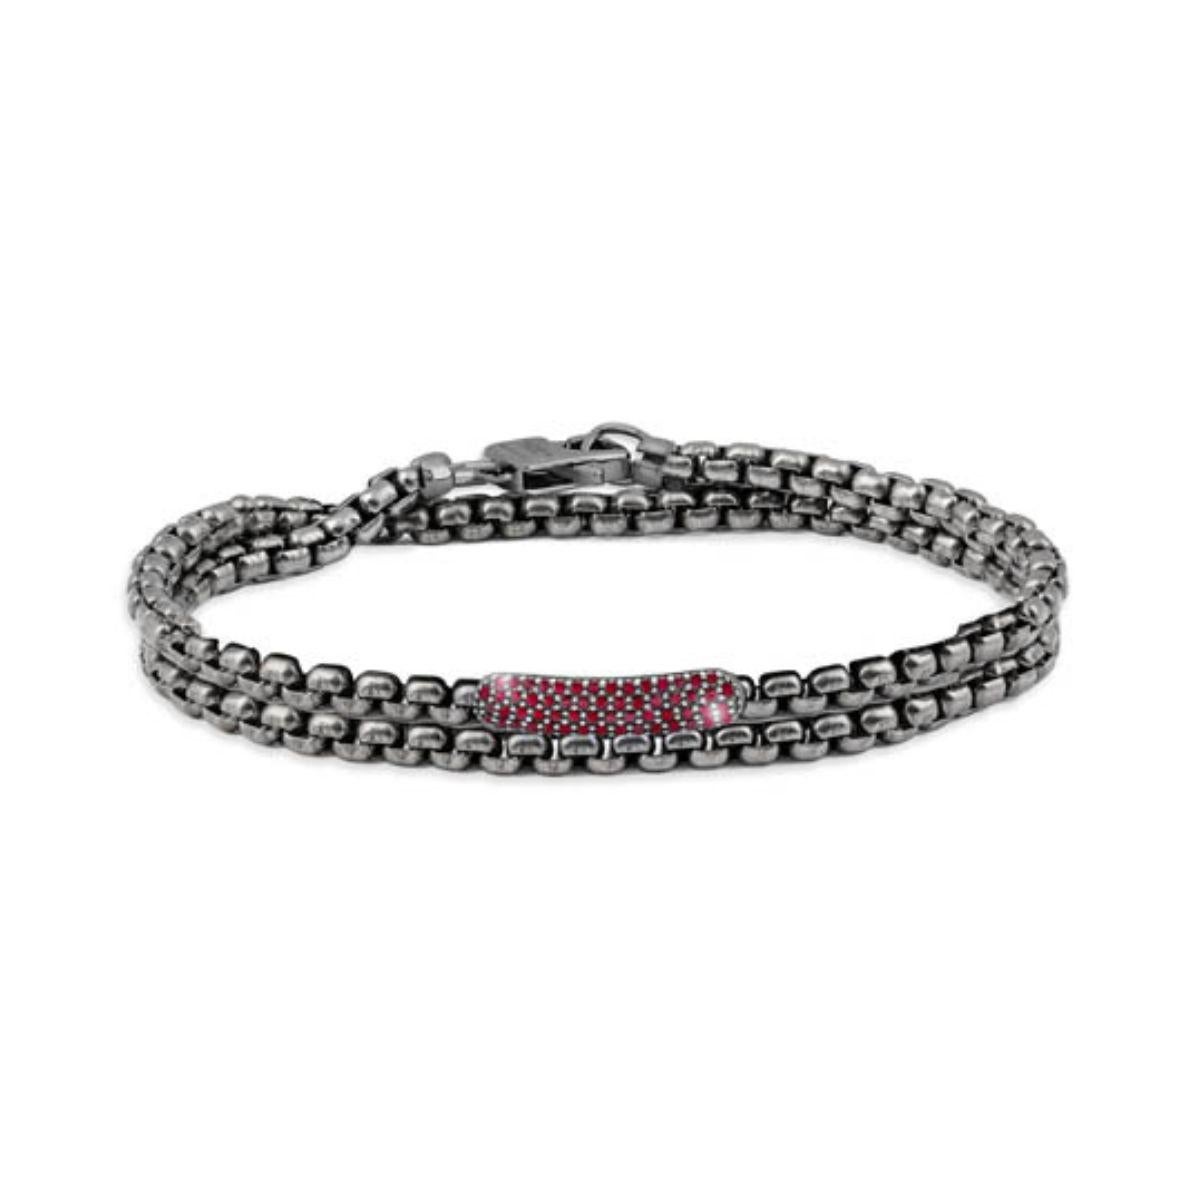 Black Rhodium Plated Sterling Silver Catena Baton Bracelet with Rubies, Size M

The bracelets are handcrafted using carefully selected rare stones and feature a black rhodium-plated sterling silver baton with 0.45cts of sparkling red rubies arranged